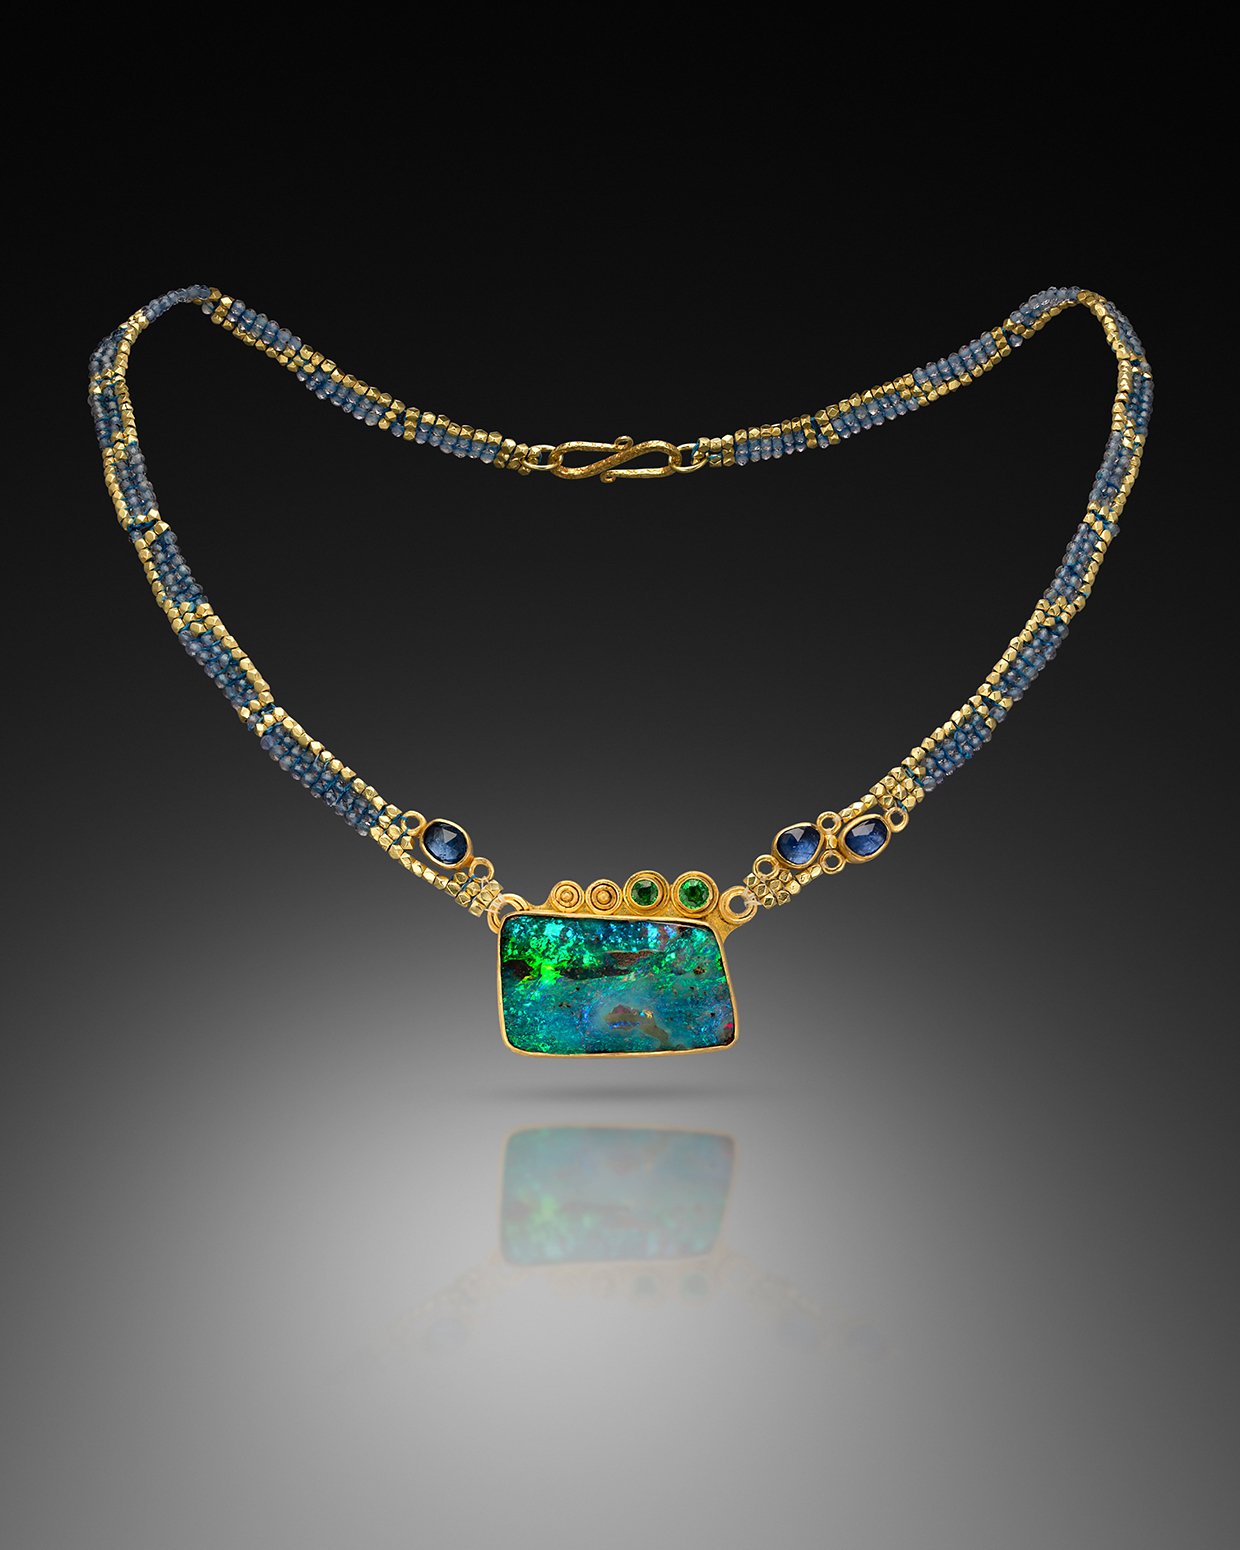 Opal Neckpiece. Necklace, hand woven of tanzanite and 20k gold beads. Pendant, hand fabricated of 20k gold set with tsavorites, sapphires, and a boulder opal.